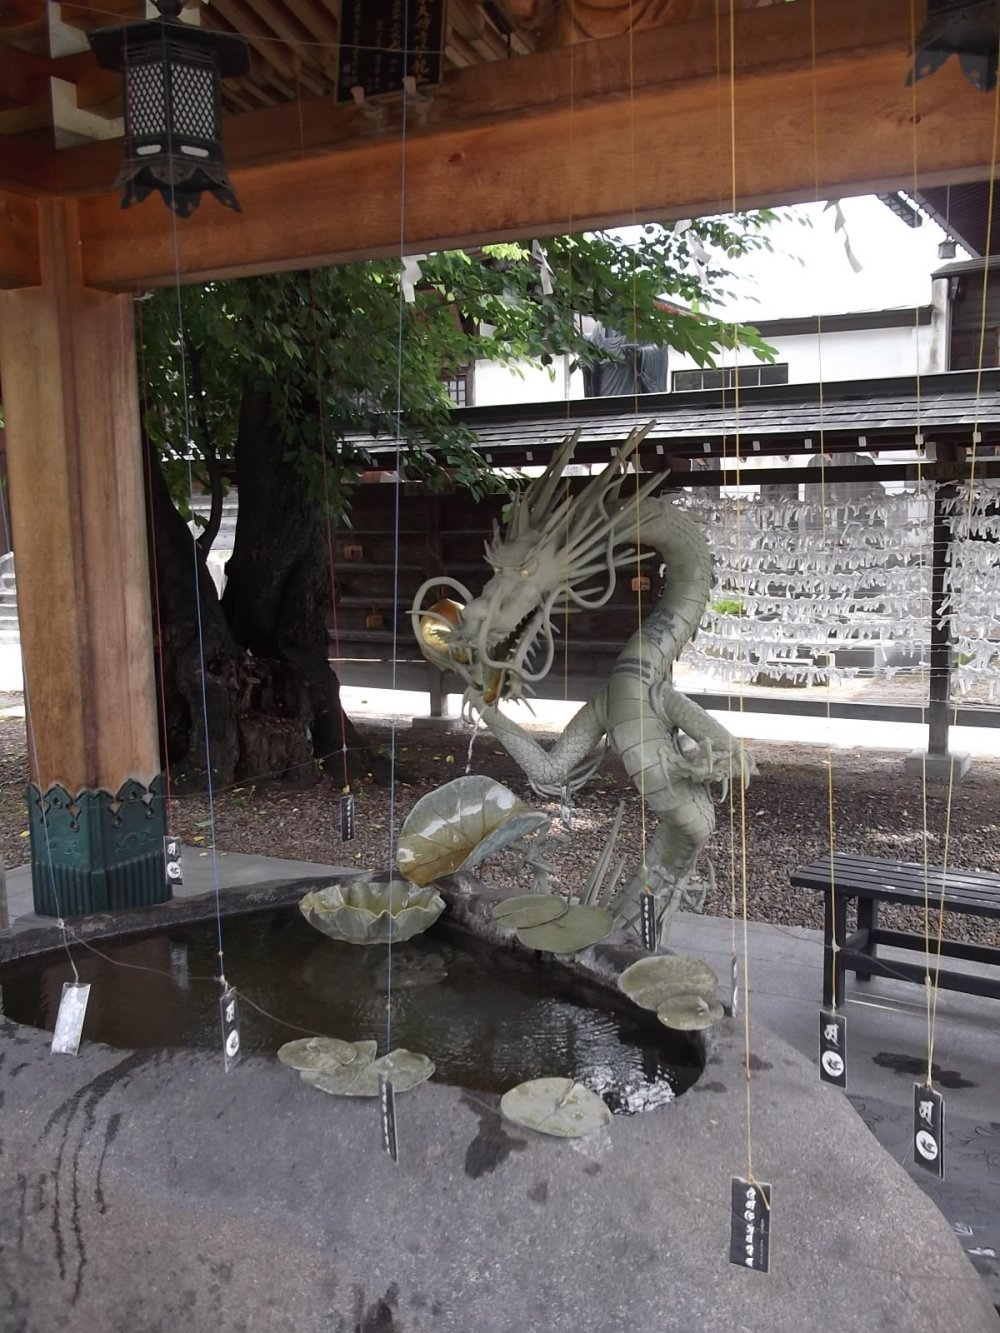 A fierce-looking dragon will watch you purify your hands